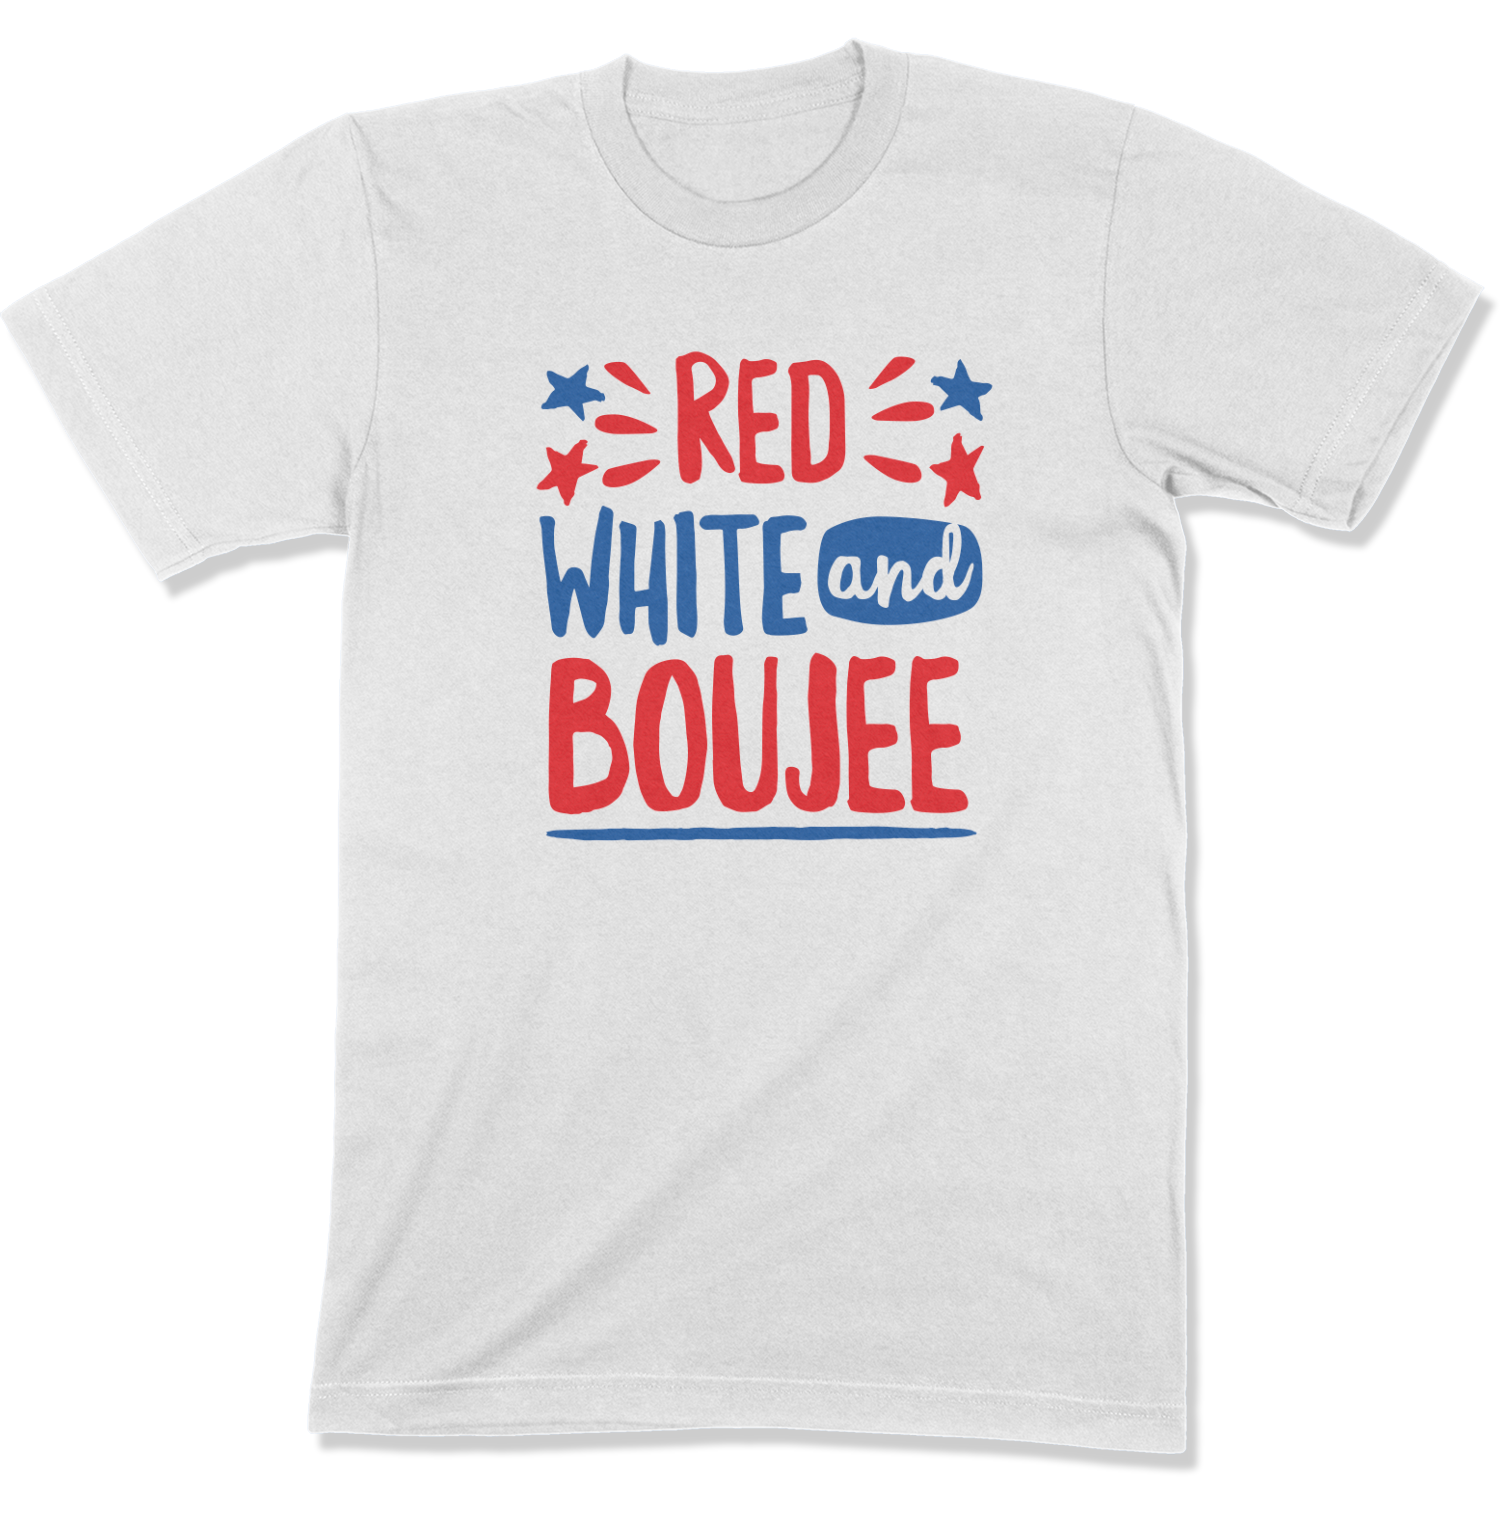 red white and boujee shirt